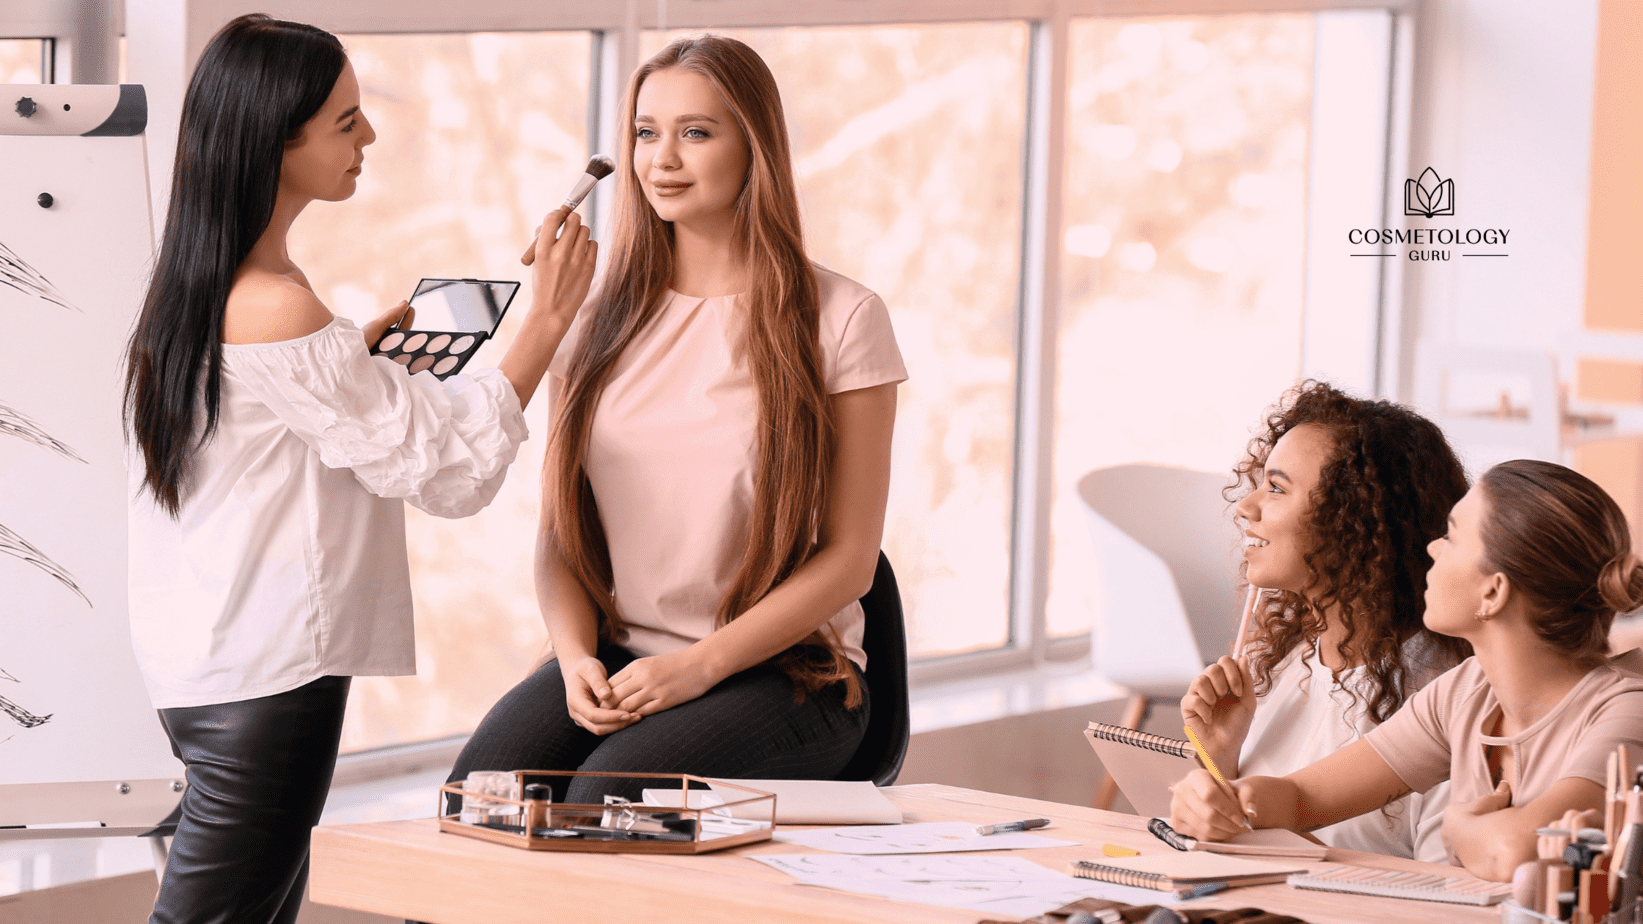 How Hard is Cosmetology School? What You Need To Know Before You Enroll